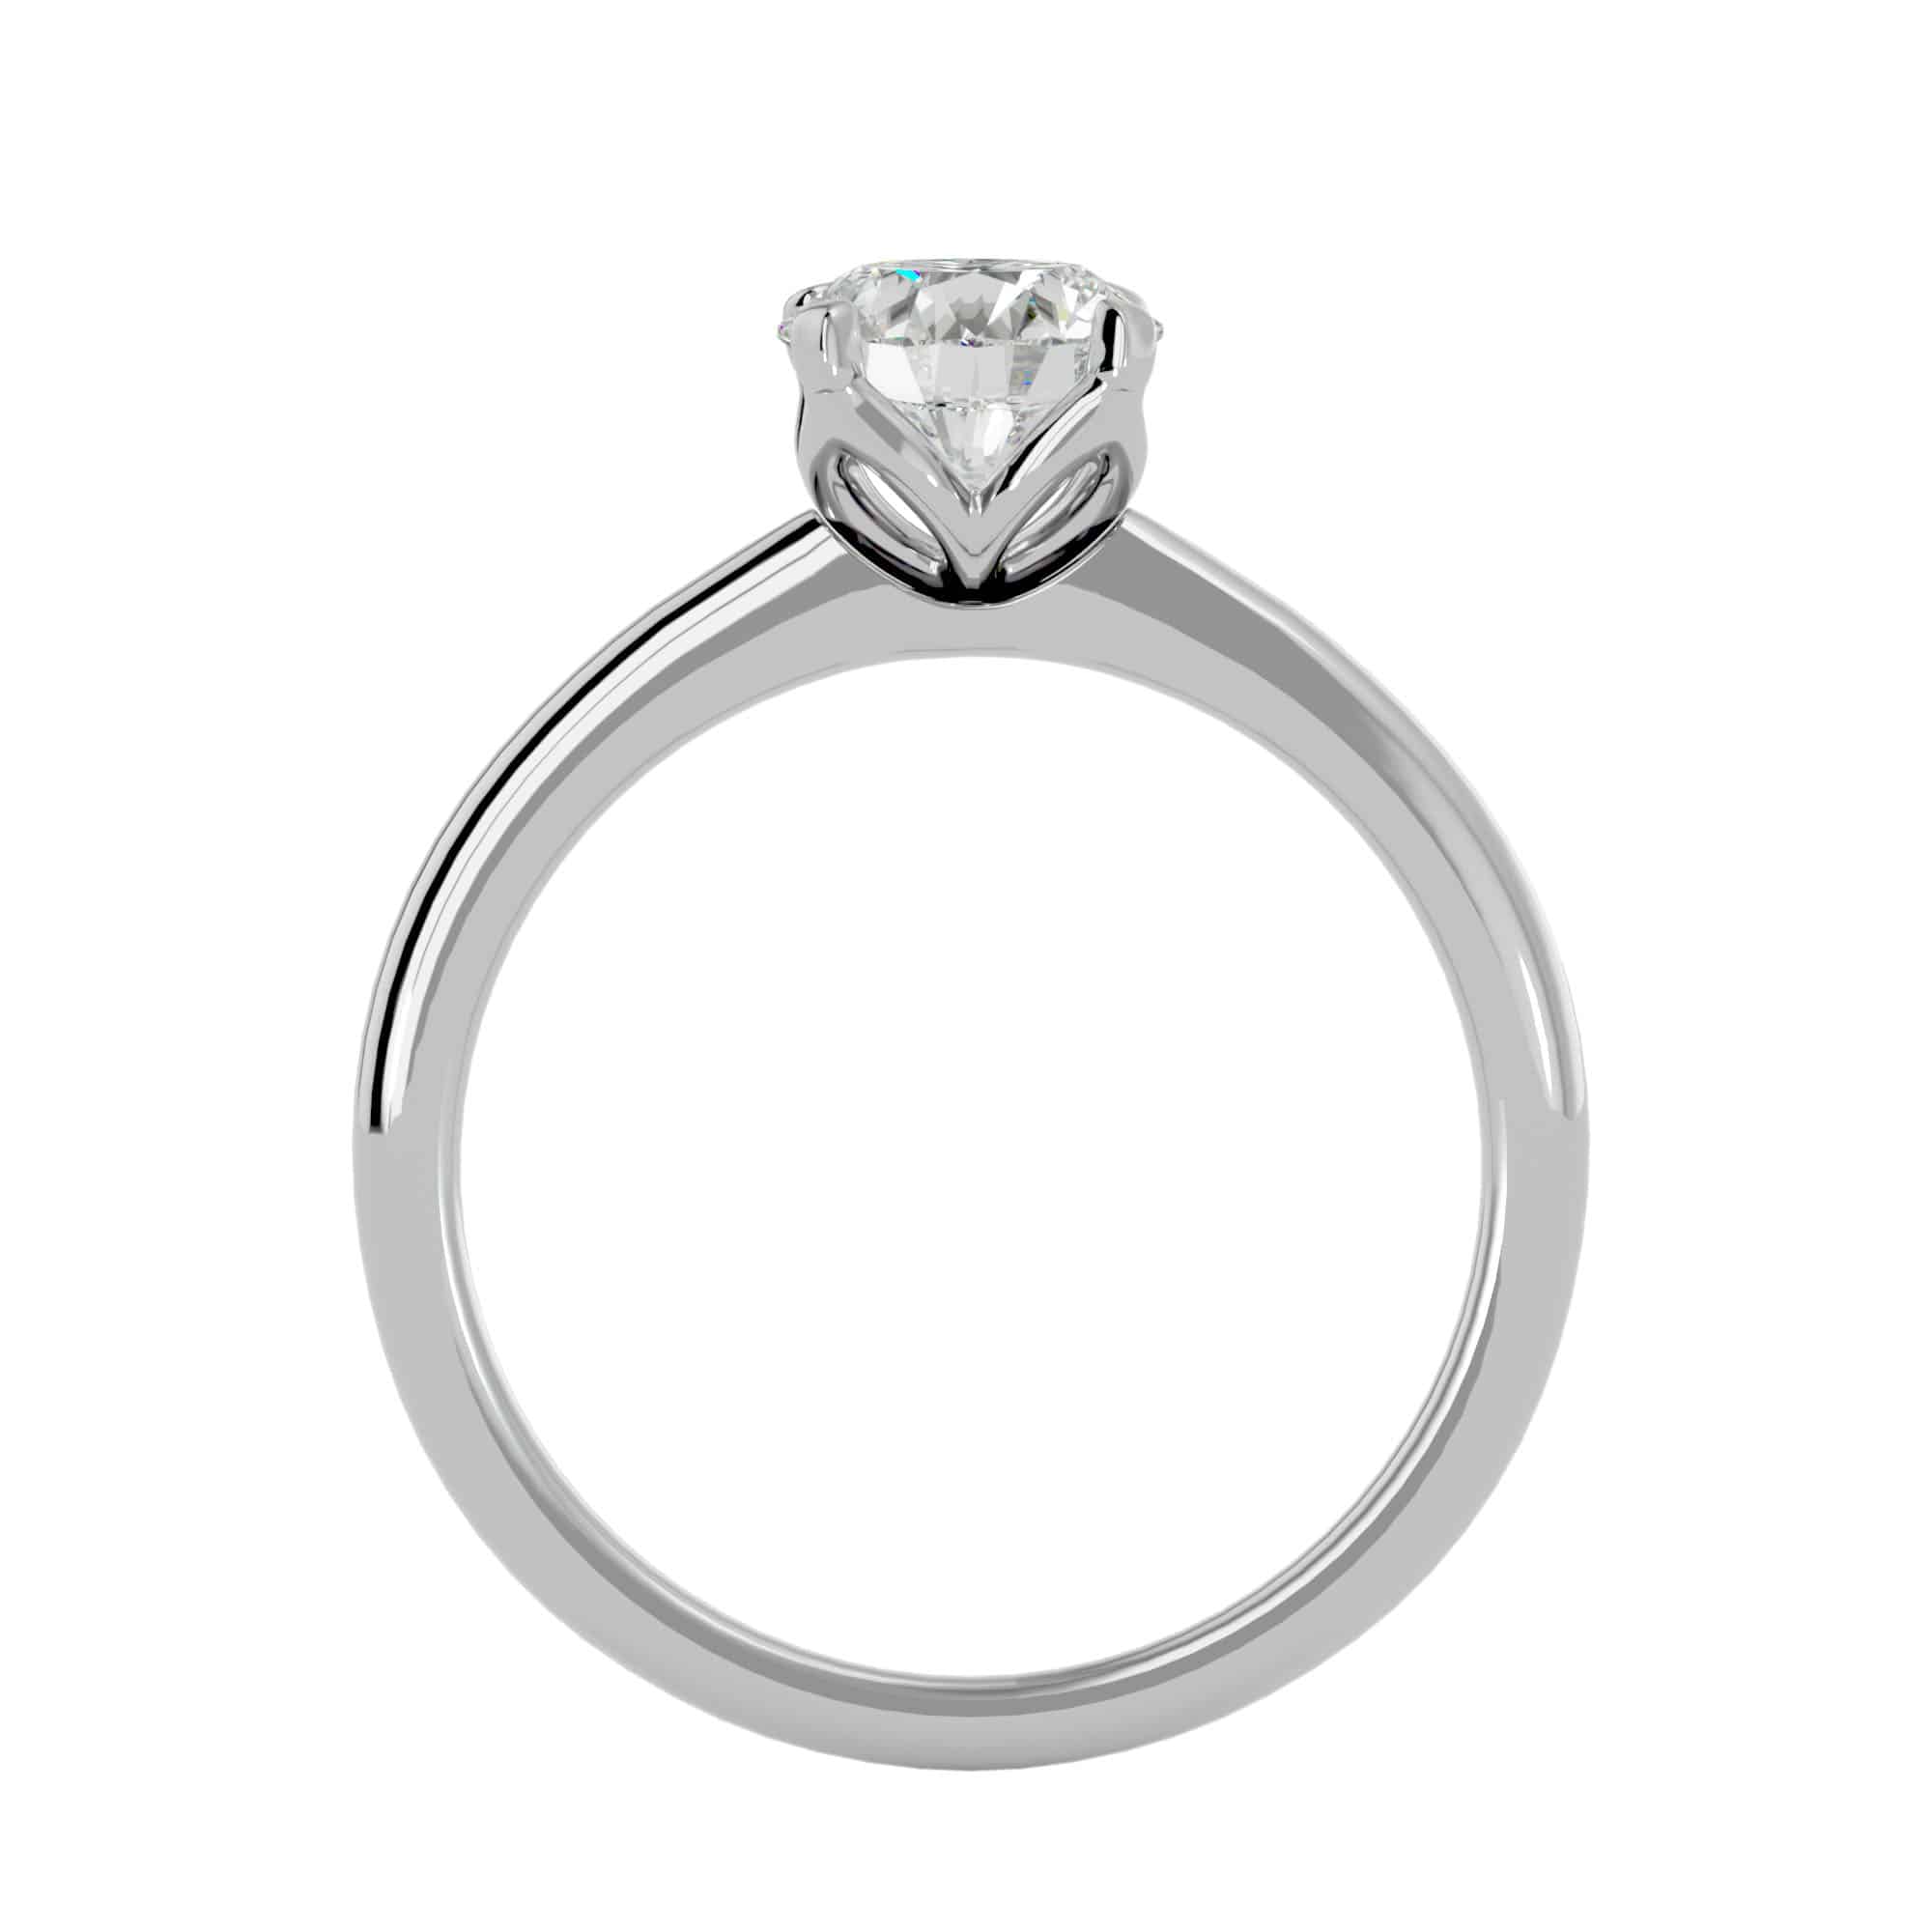 Floral Solitaire Engagement Ring Petite Setting